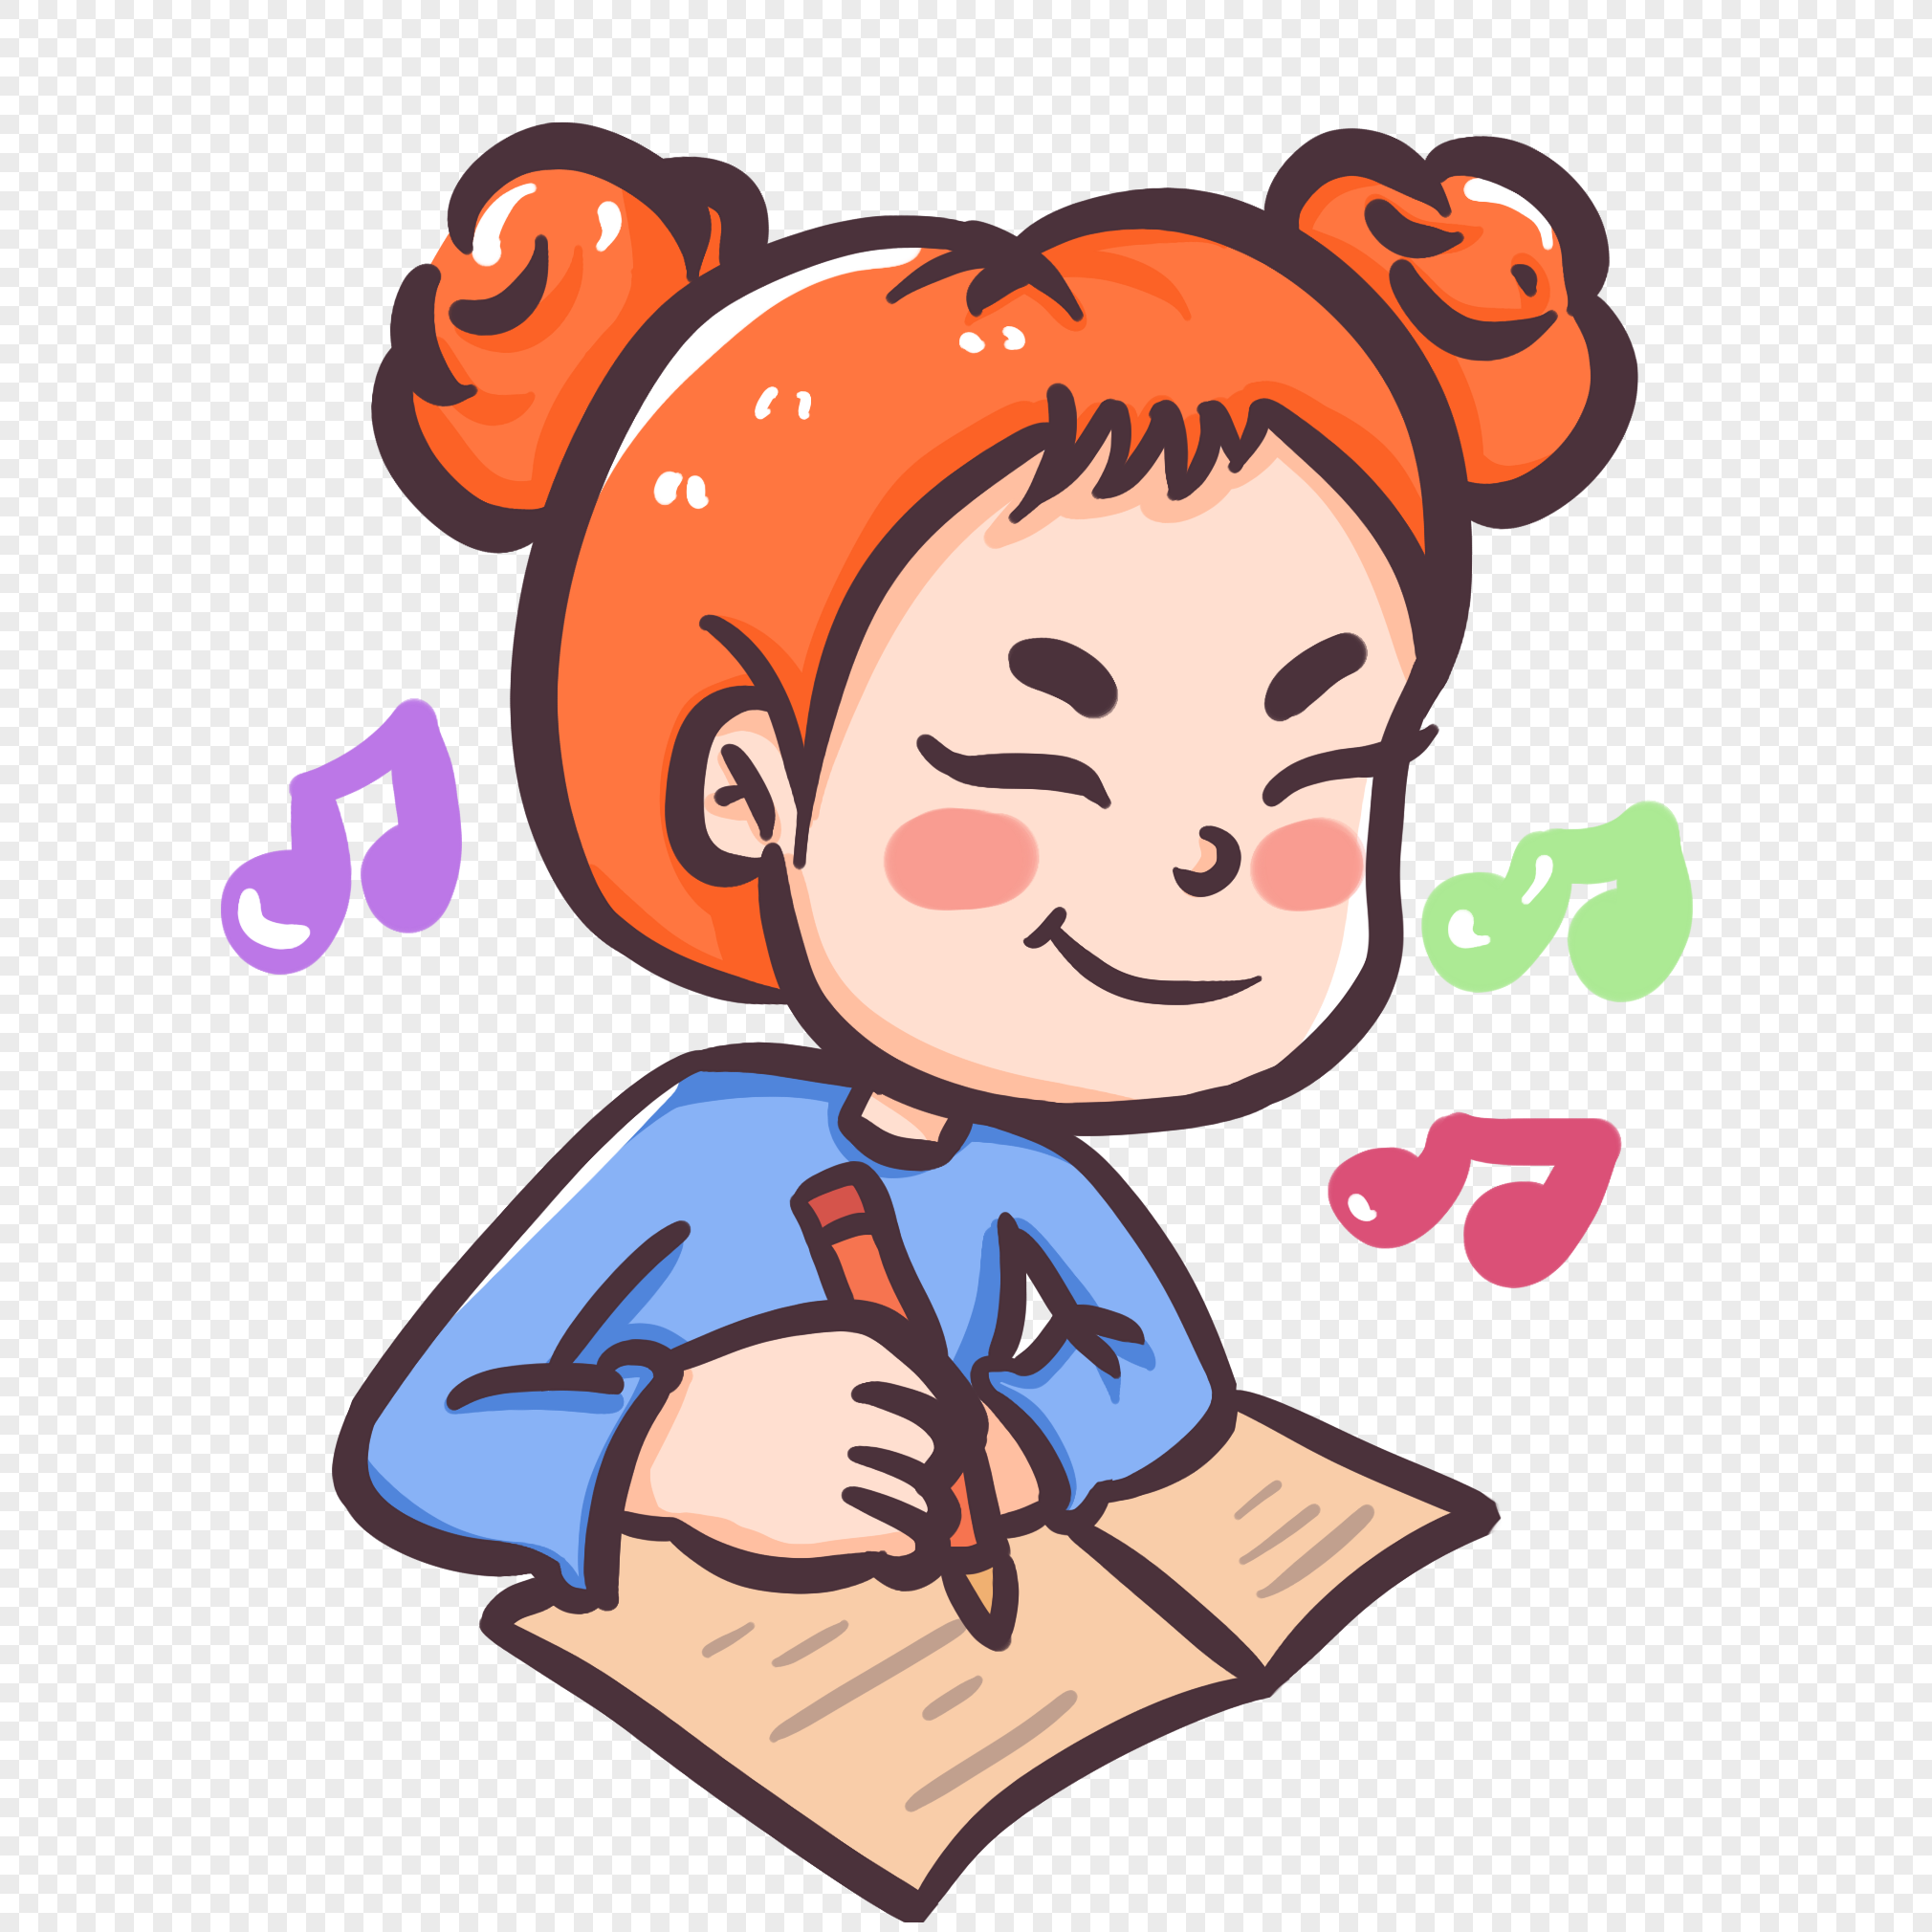 Girl who writes homework during the school quarter, writing girl, school writing, and homework png picture